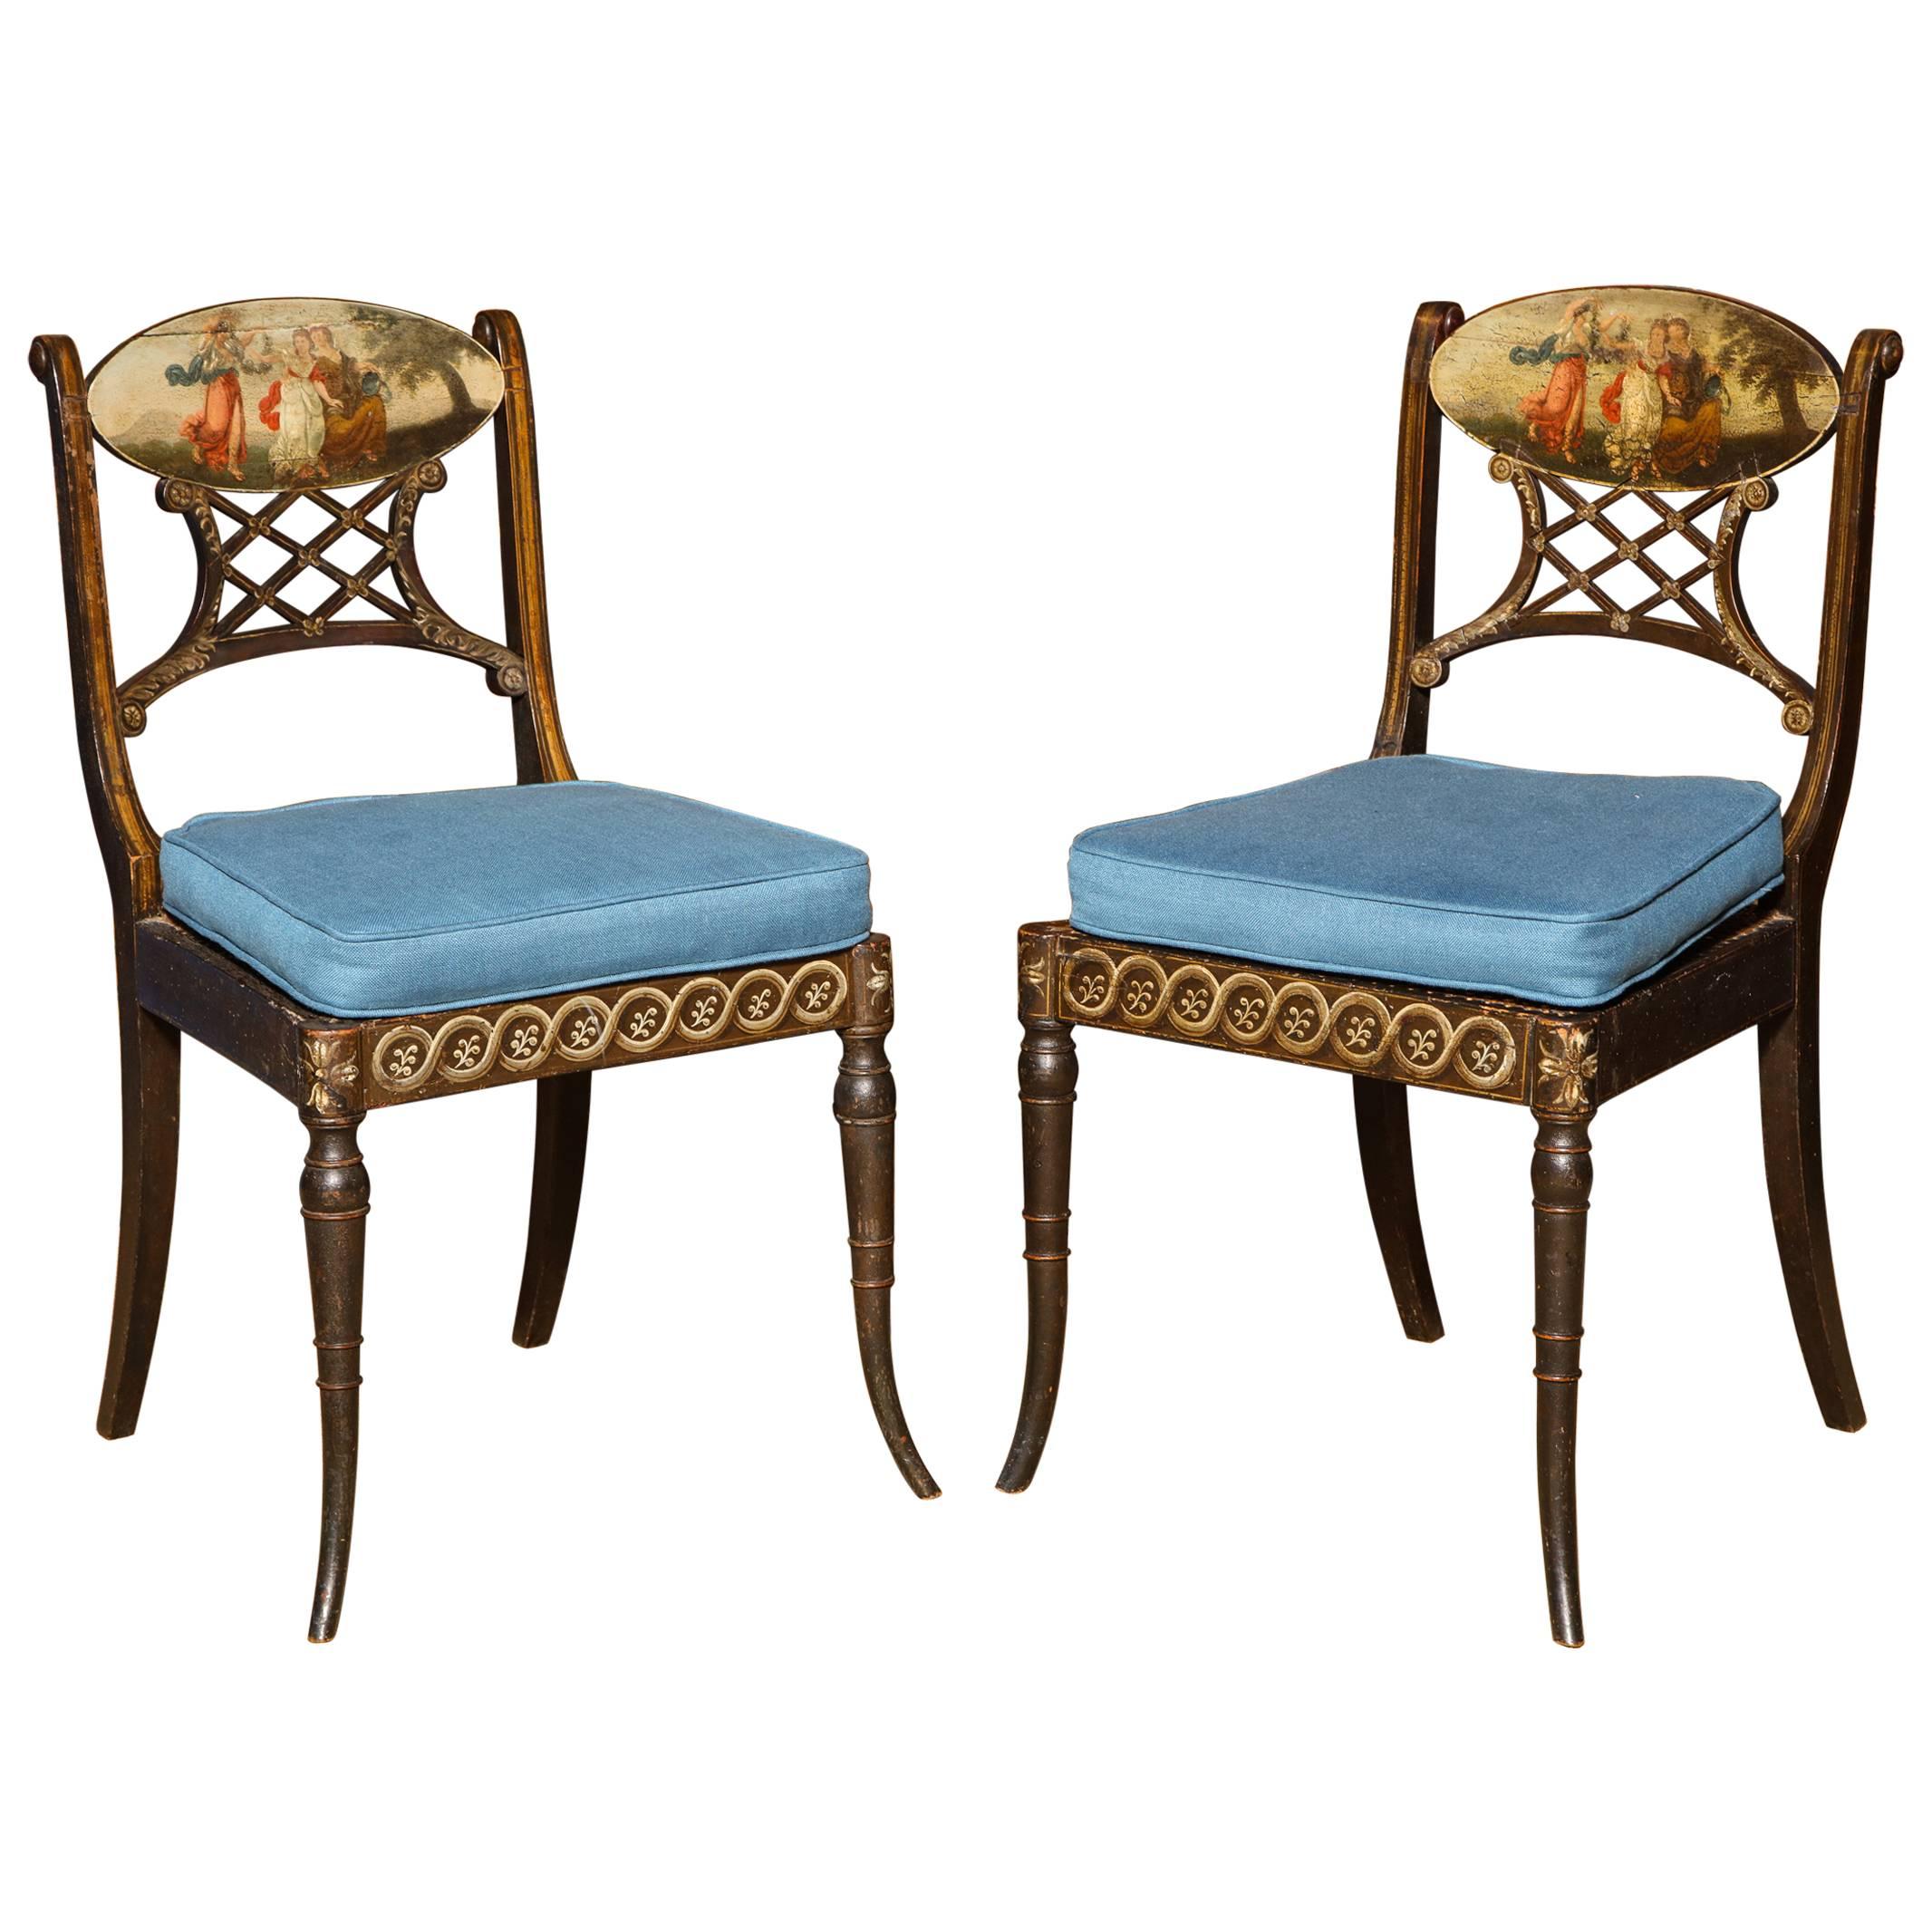 Sheraton Polychrome Faux Rosewood  Side Chairs, English, circa 1795 For Sale